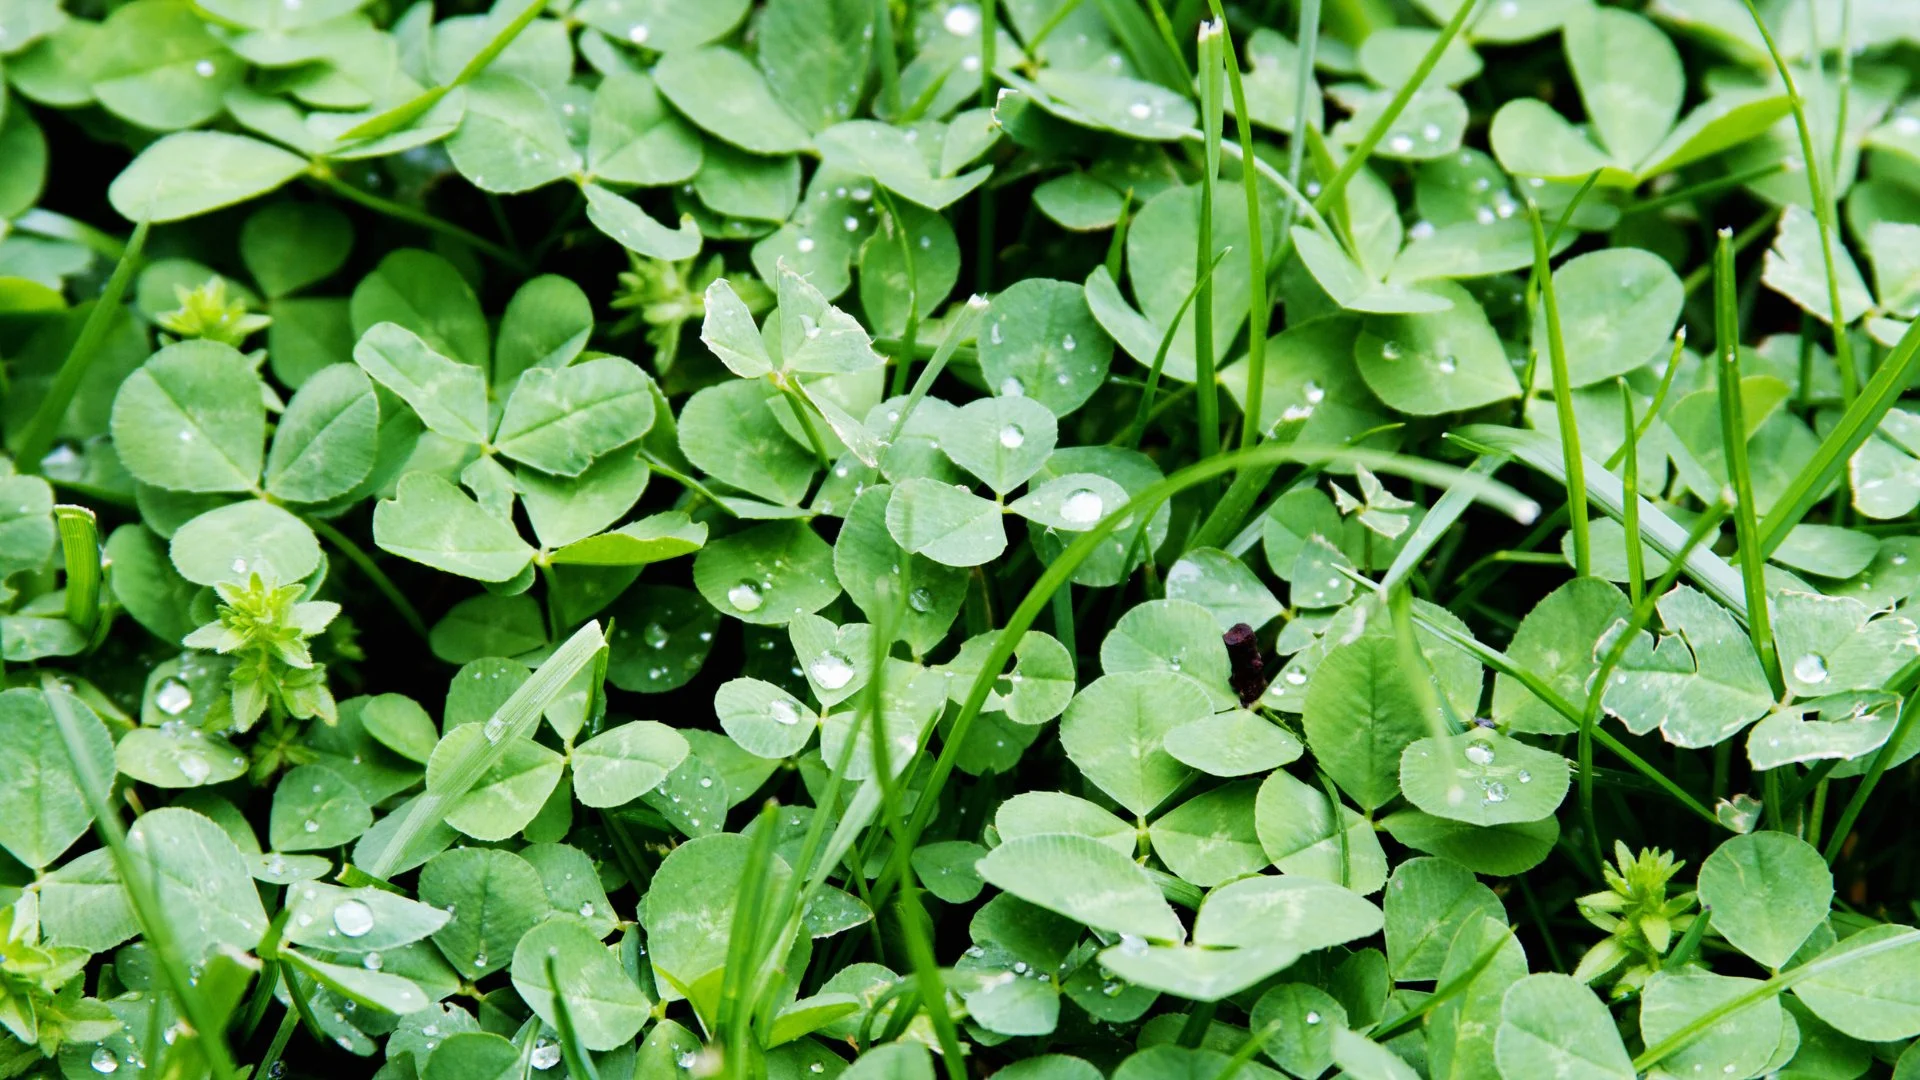 Clover - How to Spot & Eliminate This Weed From Your Lawn